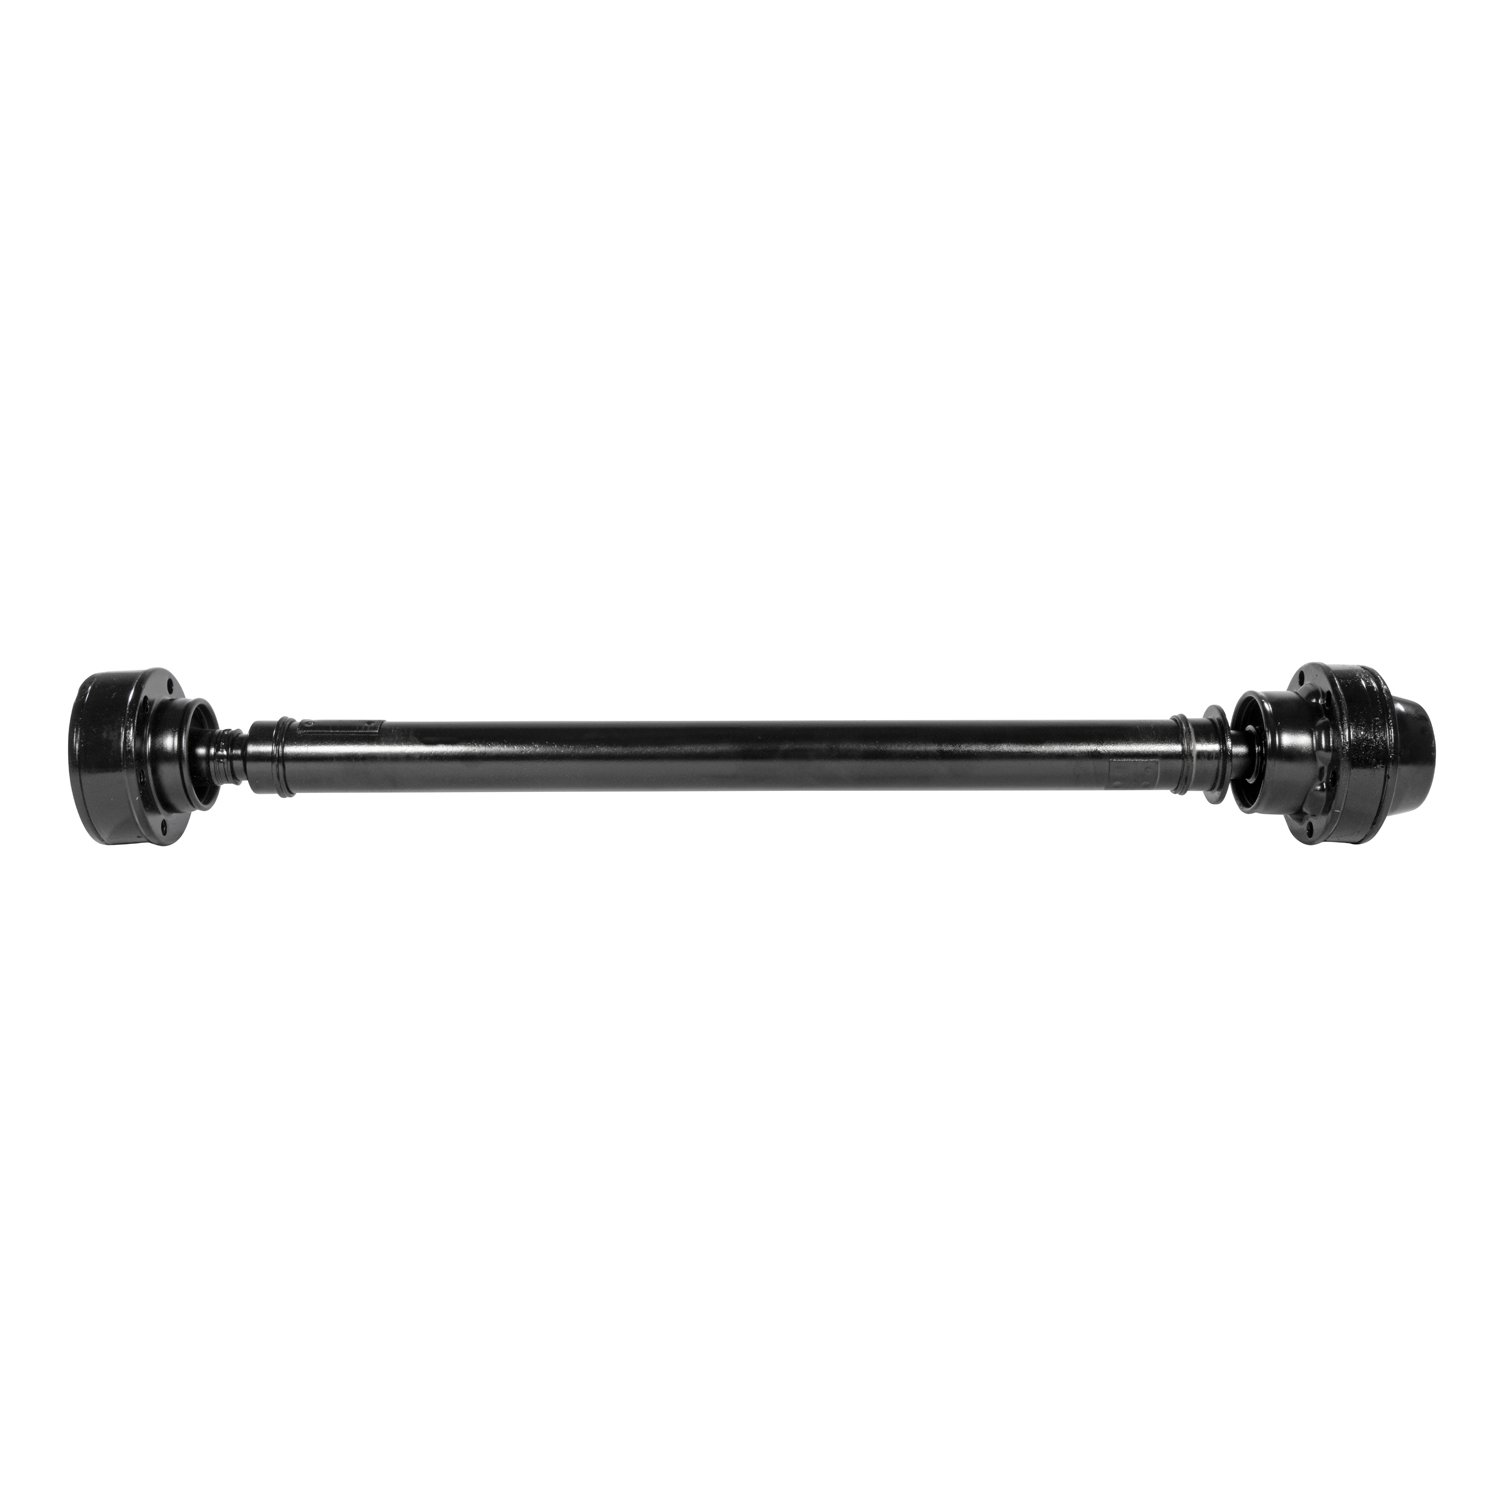 USA Standard 44623 Front Driveshaft, For Ford, Lincoln, Mercury Truck & Suv, 22.25 in. Weld-To-Weld